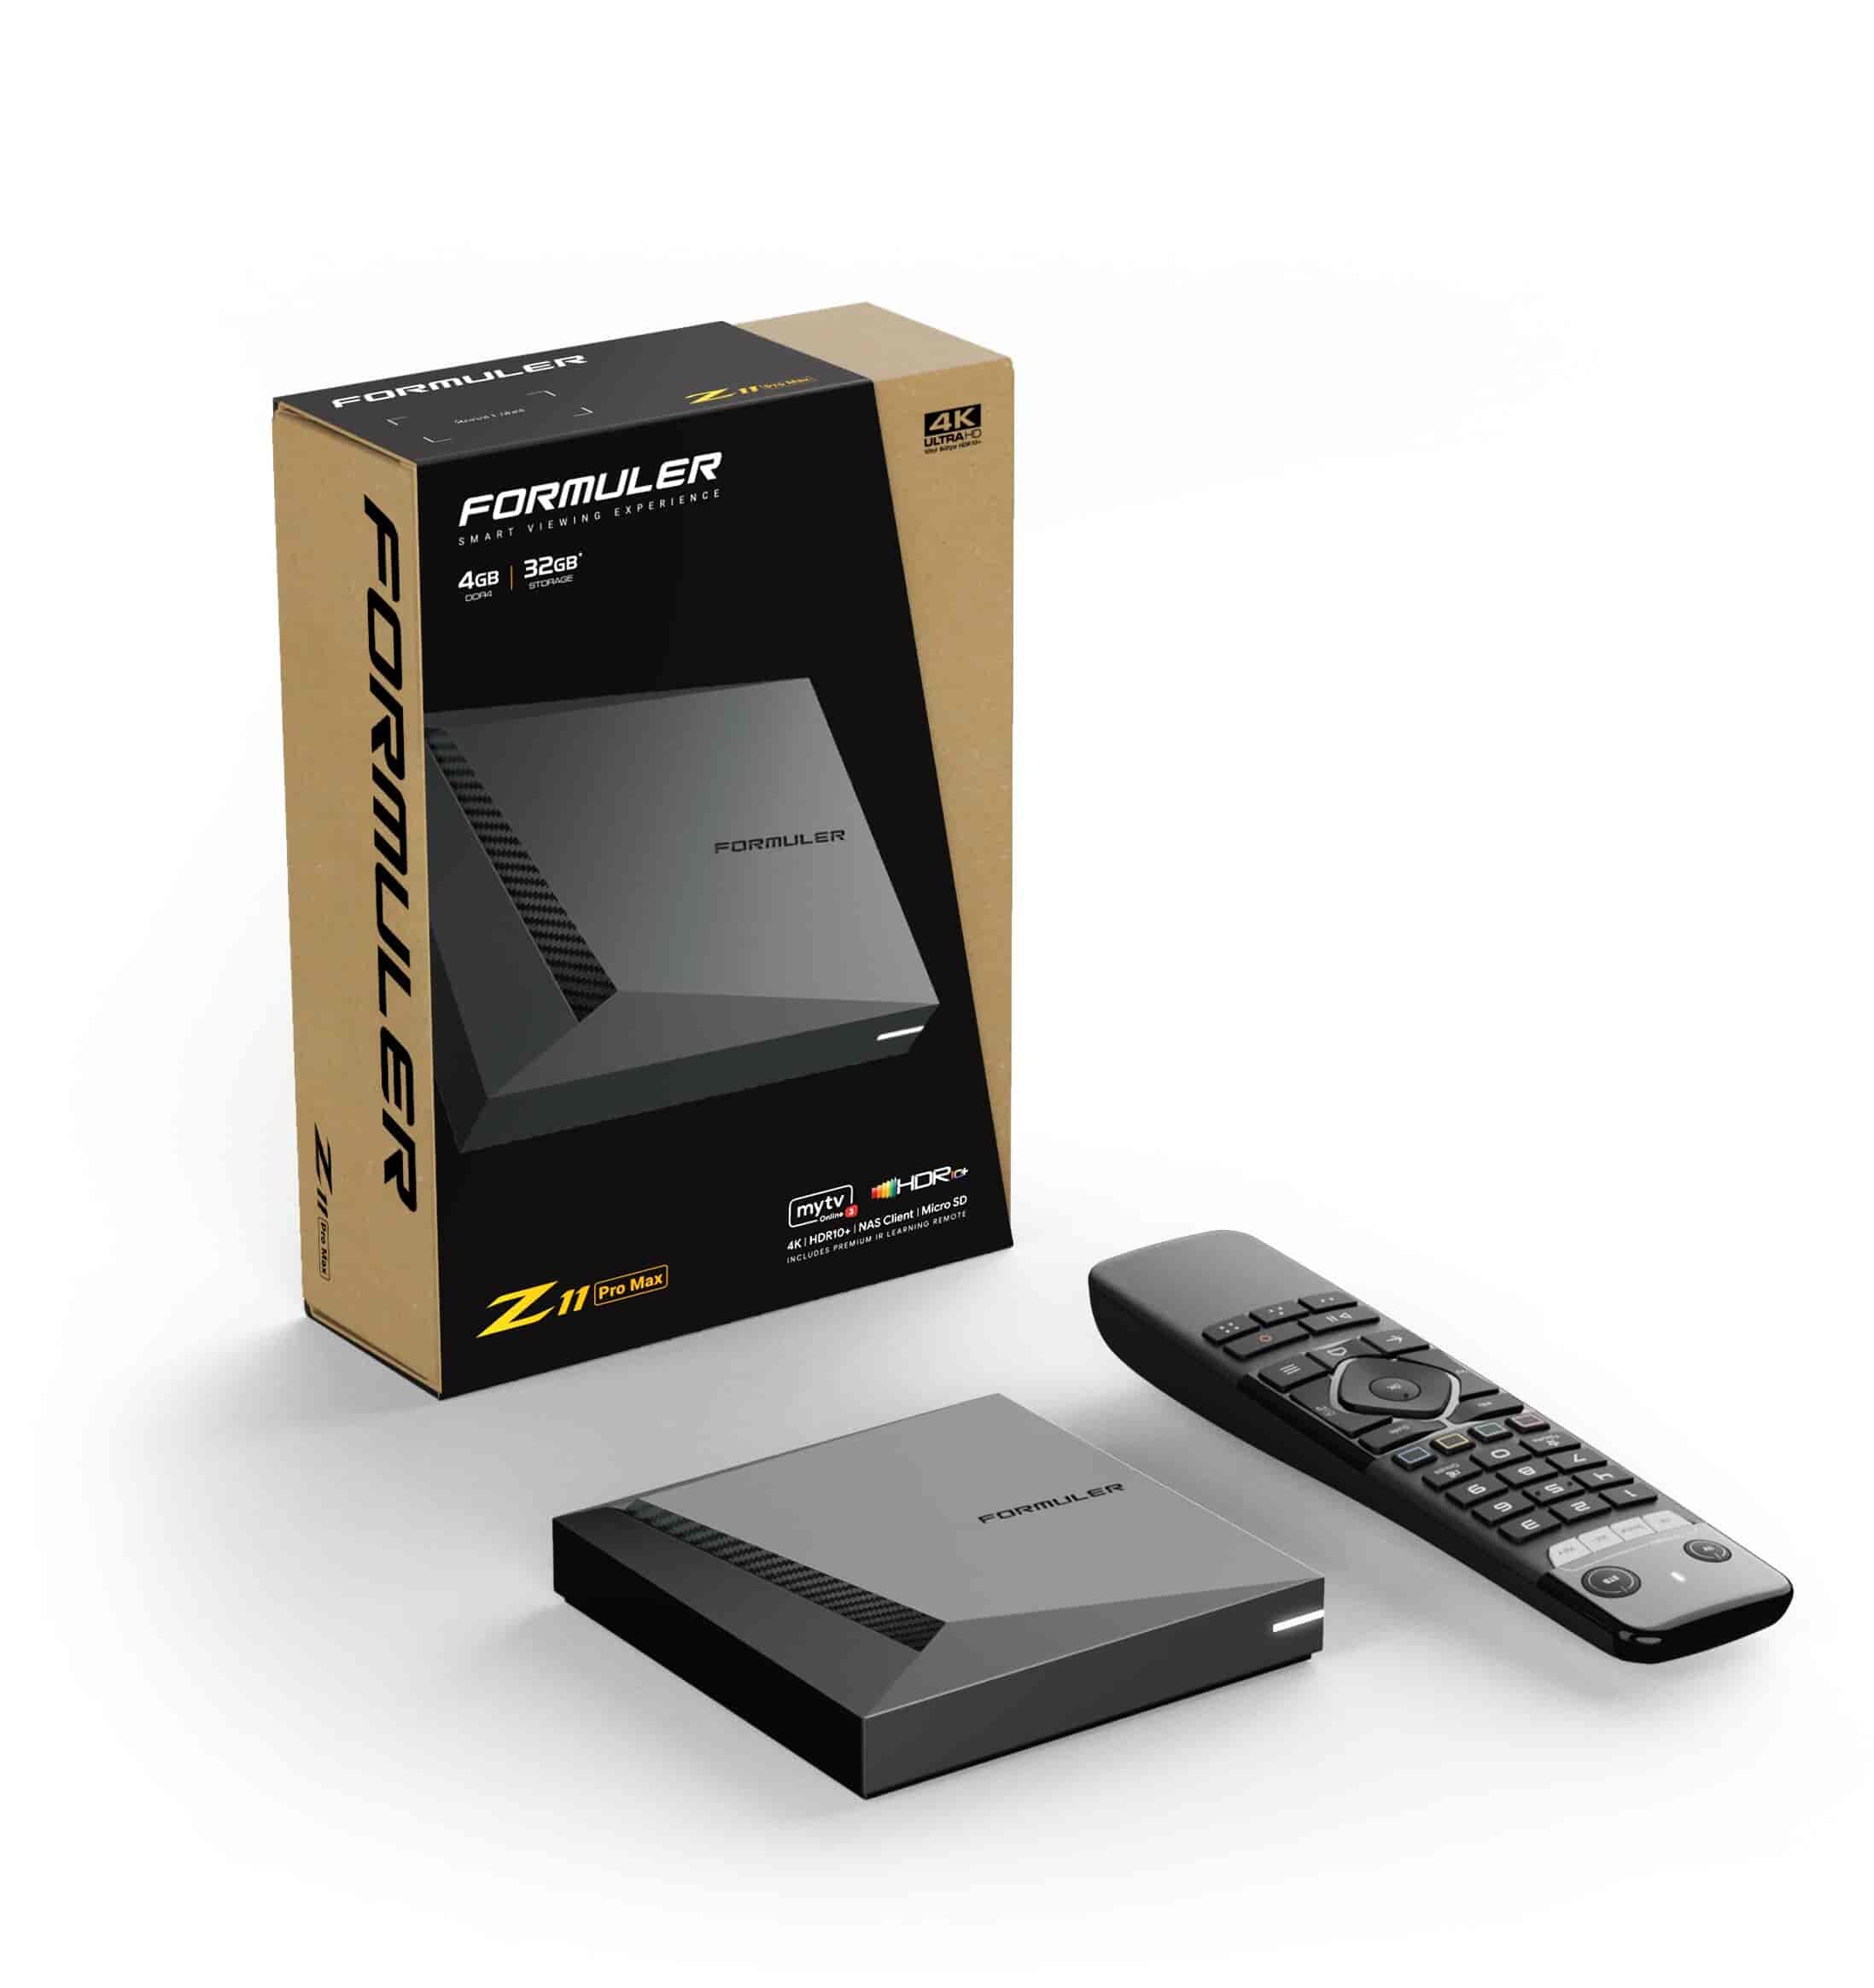 Formular Z11 PROMAX 4K Android 11 OTT Media Streamer 4GB RAM 32GB Flash, WiFiThe fastest Formuler OTT IPTV box ever - 4GB RAM and 32GB STORAGE - Formuler Z11 Pro Max. The all-new Formuler Z11 Pro Max media streamer makes it easy to experience high-quality content on the big screen. The 4 GB RAM enables the most demanding applications to run smoothly. Embedded Widevine Level 1 and 3 DRM provides access to premium ultra high definition content. Android 11 with MYTV online 3.Formuler